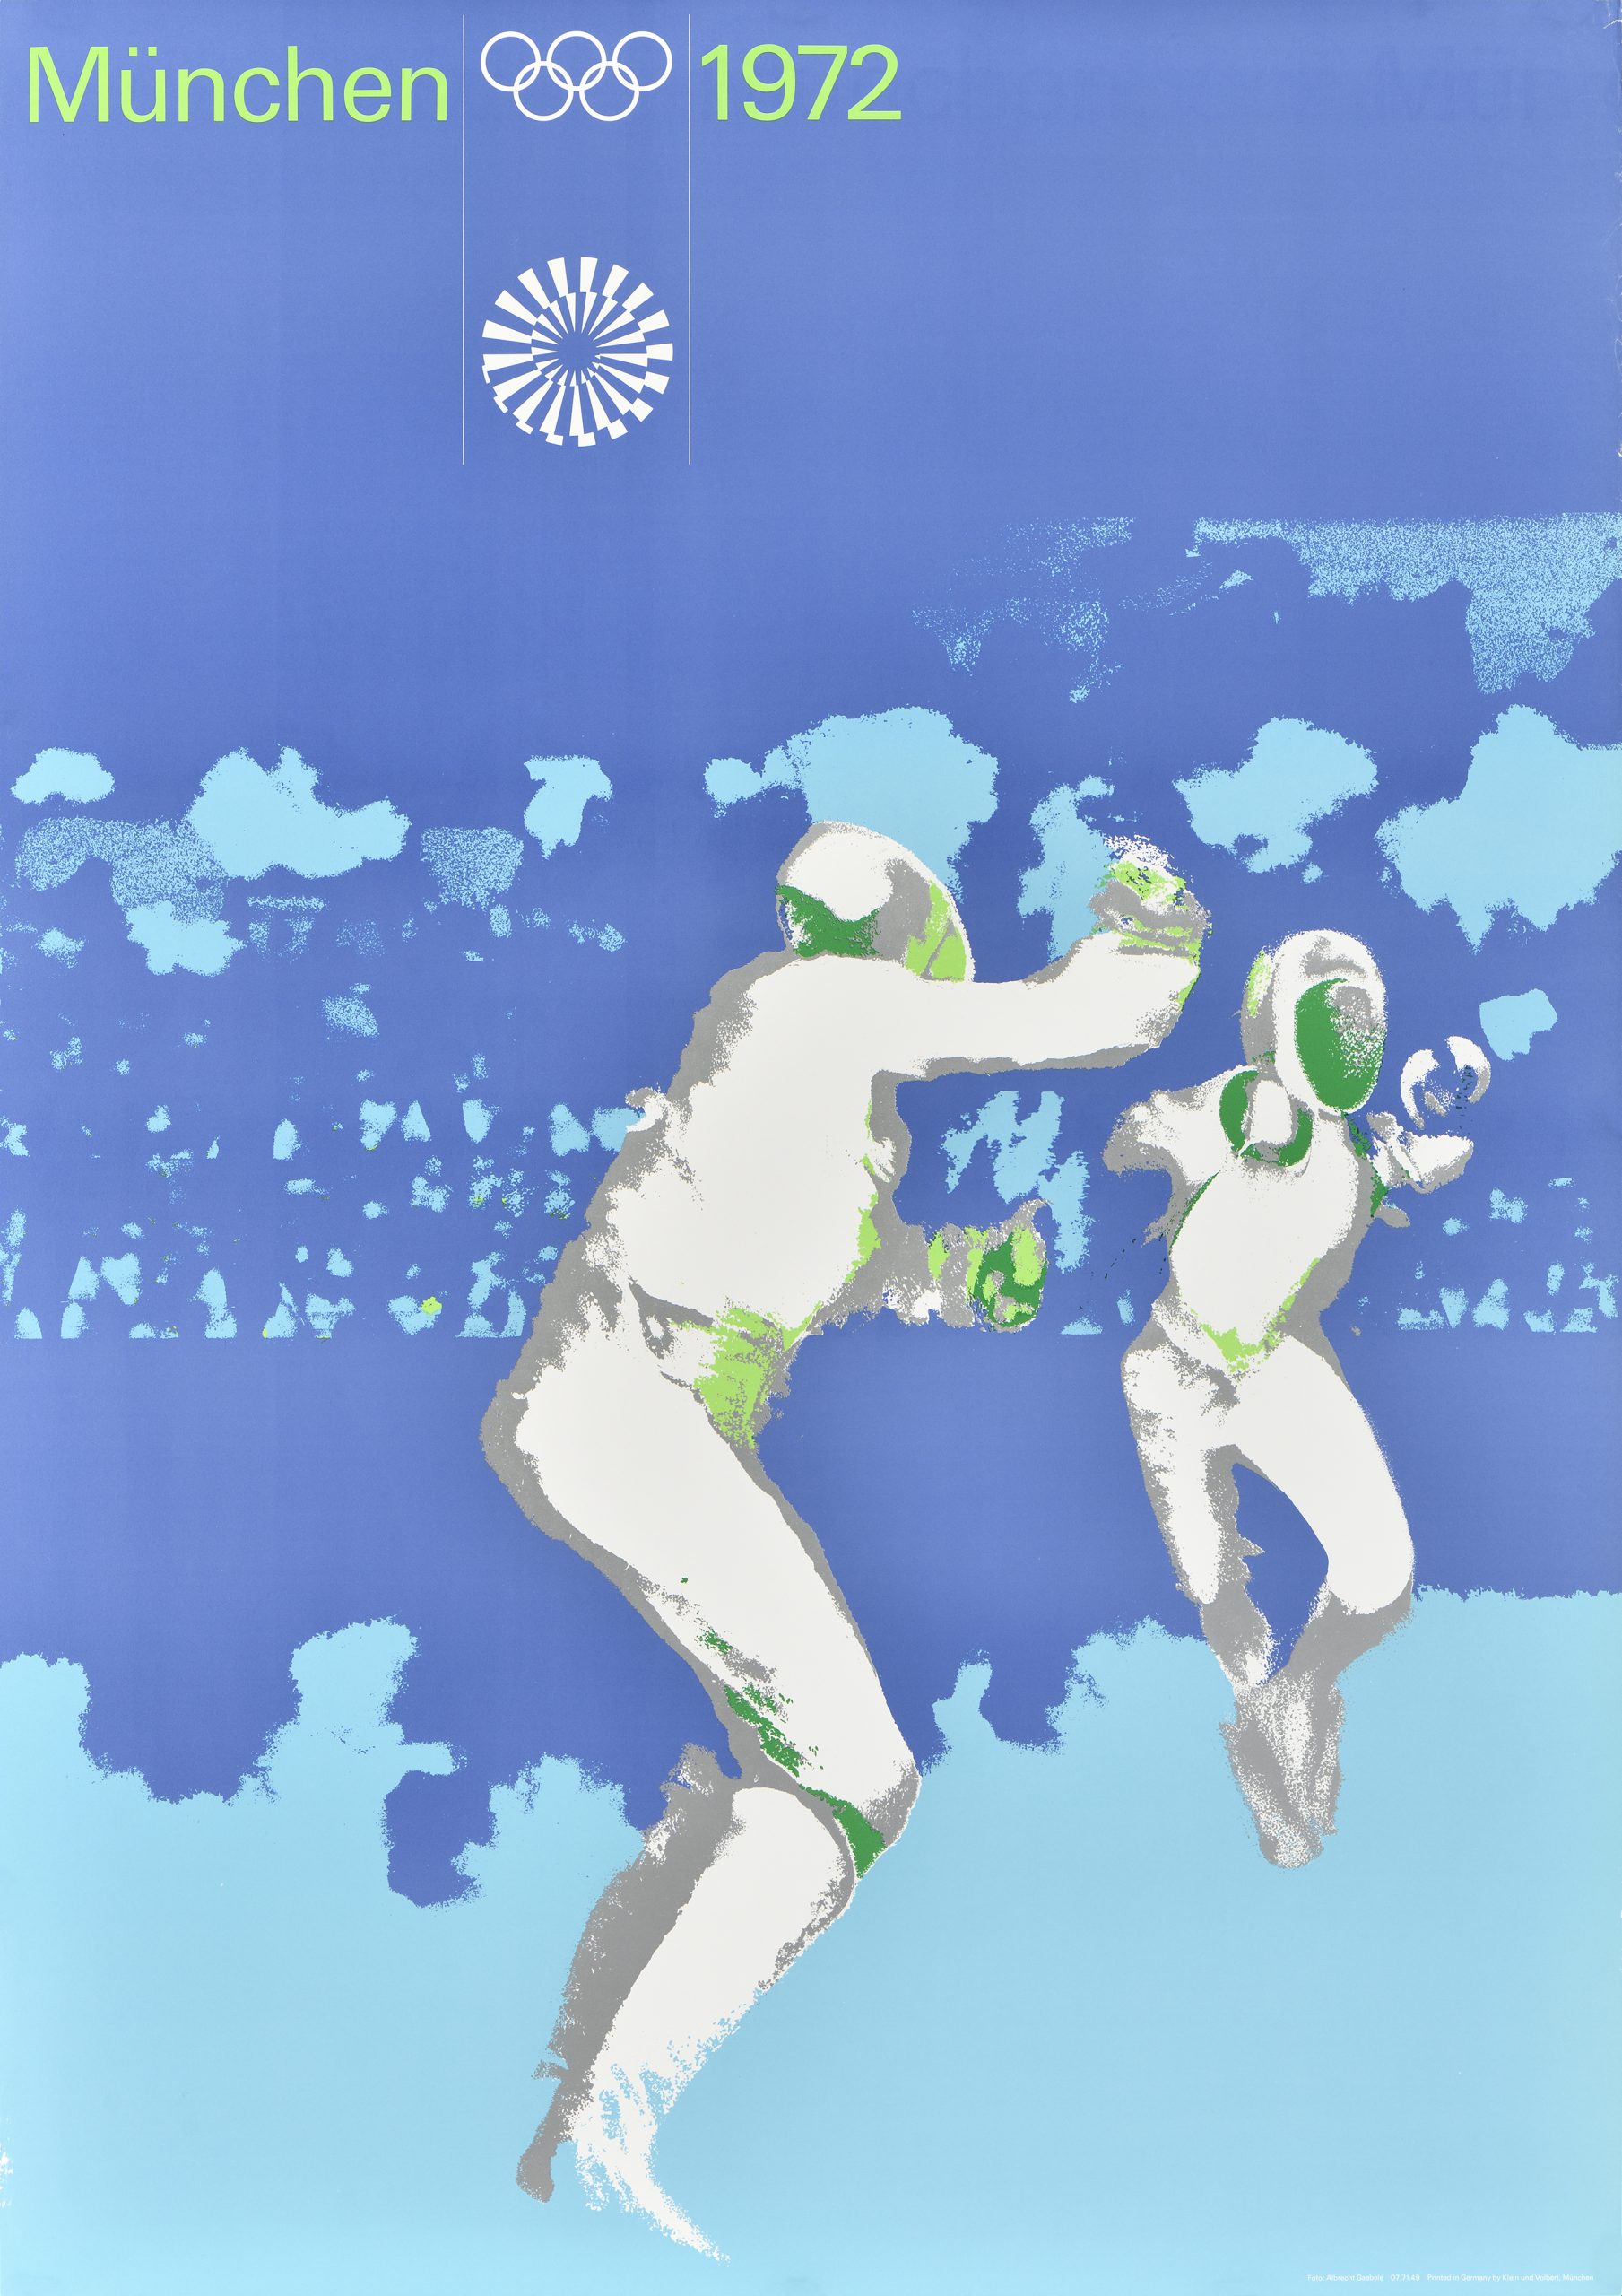 Posters of two fencers mid-fight against a blue background.